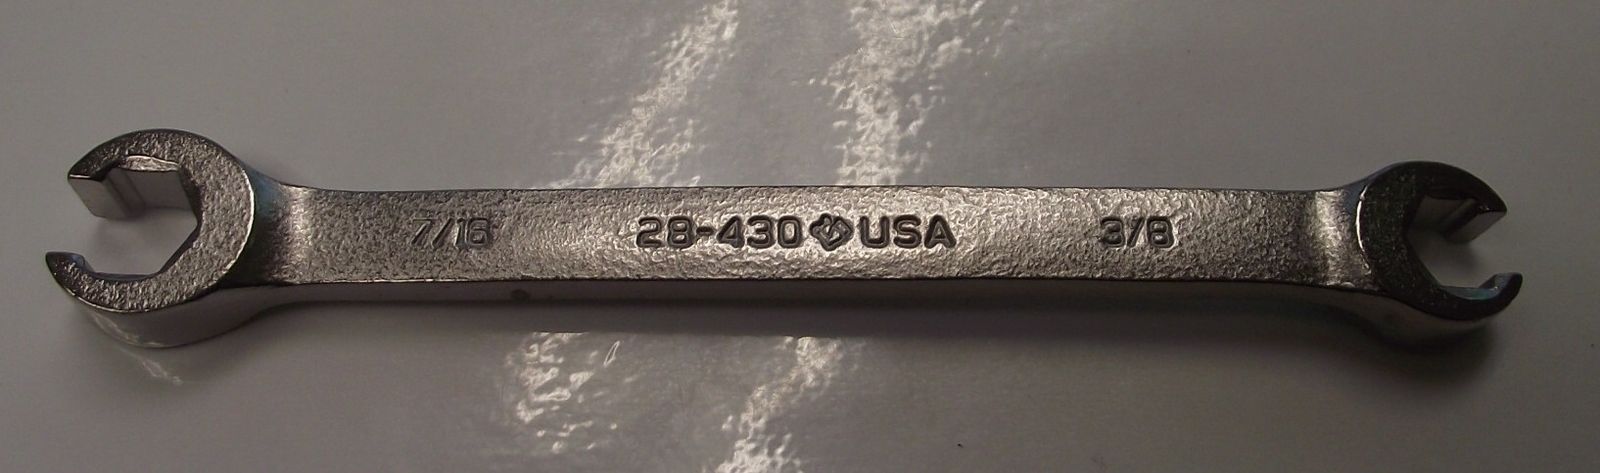 Armstrong 28-430 3/8" x 7/16" Flare Nut Wrench USA